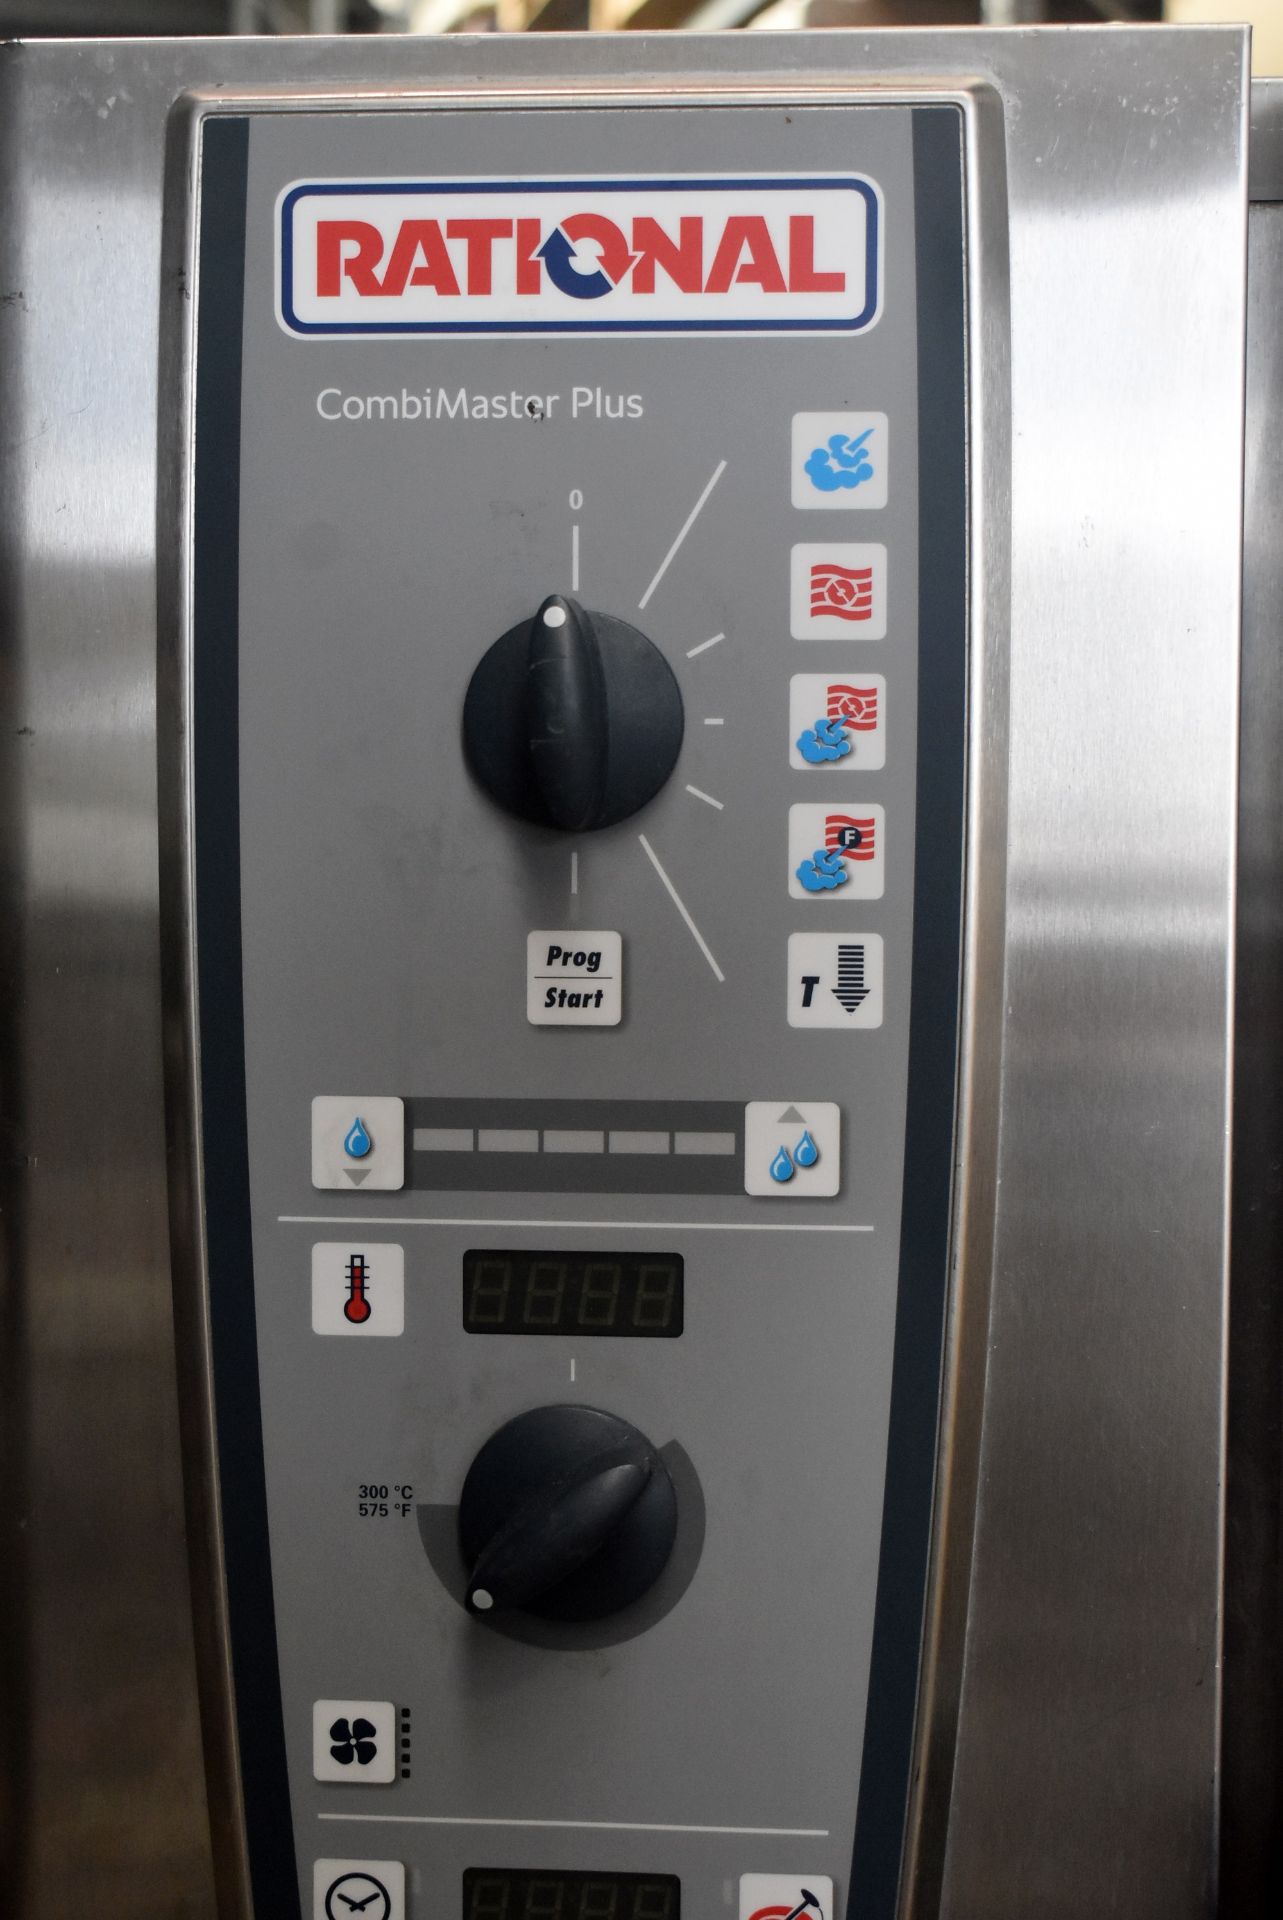 1 x Rational CombiMaster Plus 10 Grid Combi Oven - Type: CMP 102 - 3 Phase - Image 6 of 23